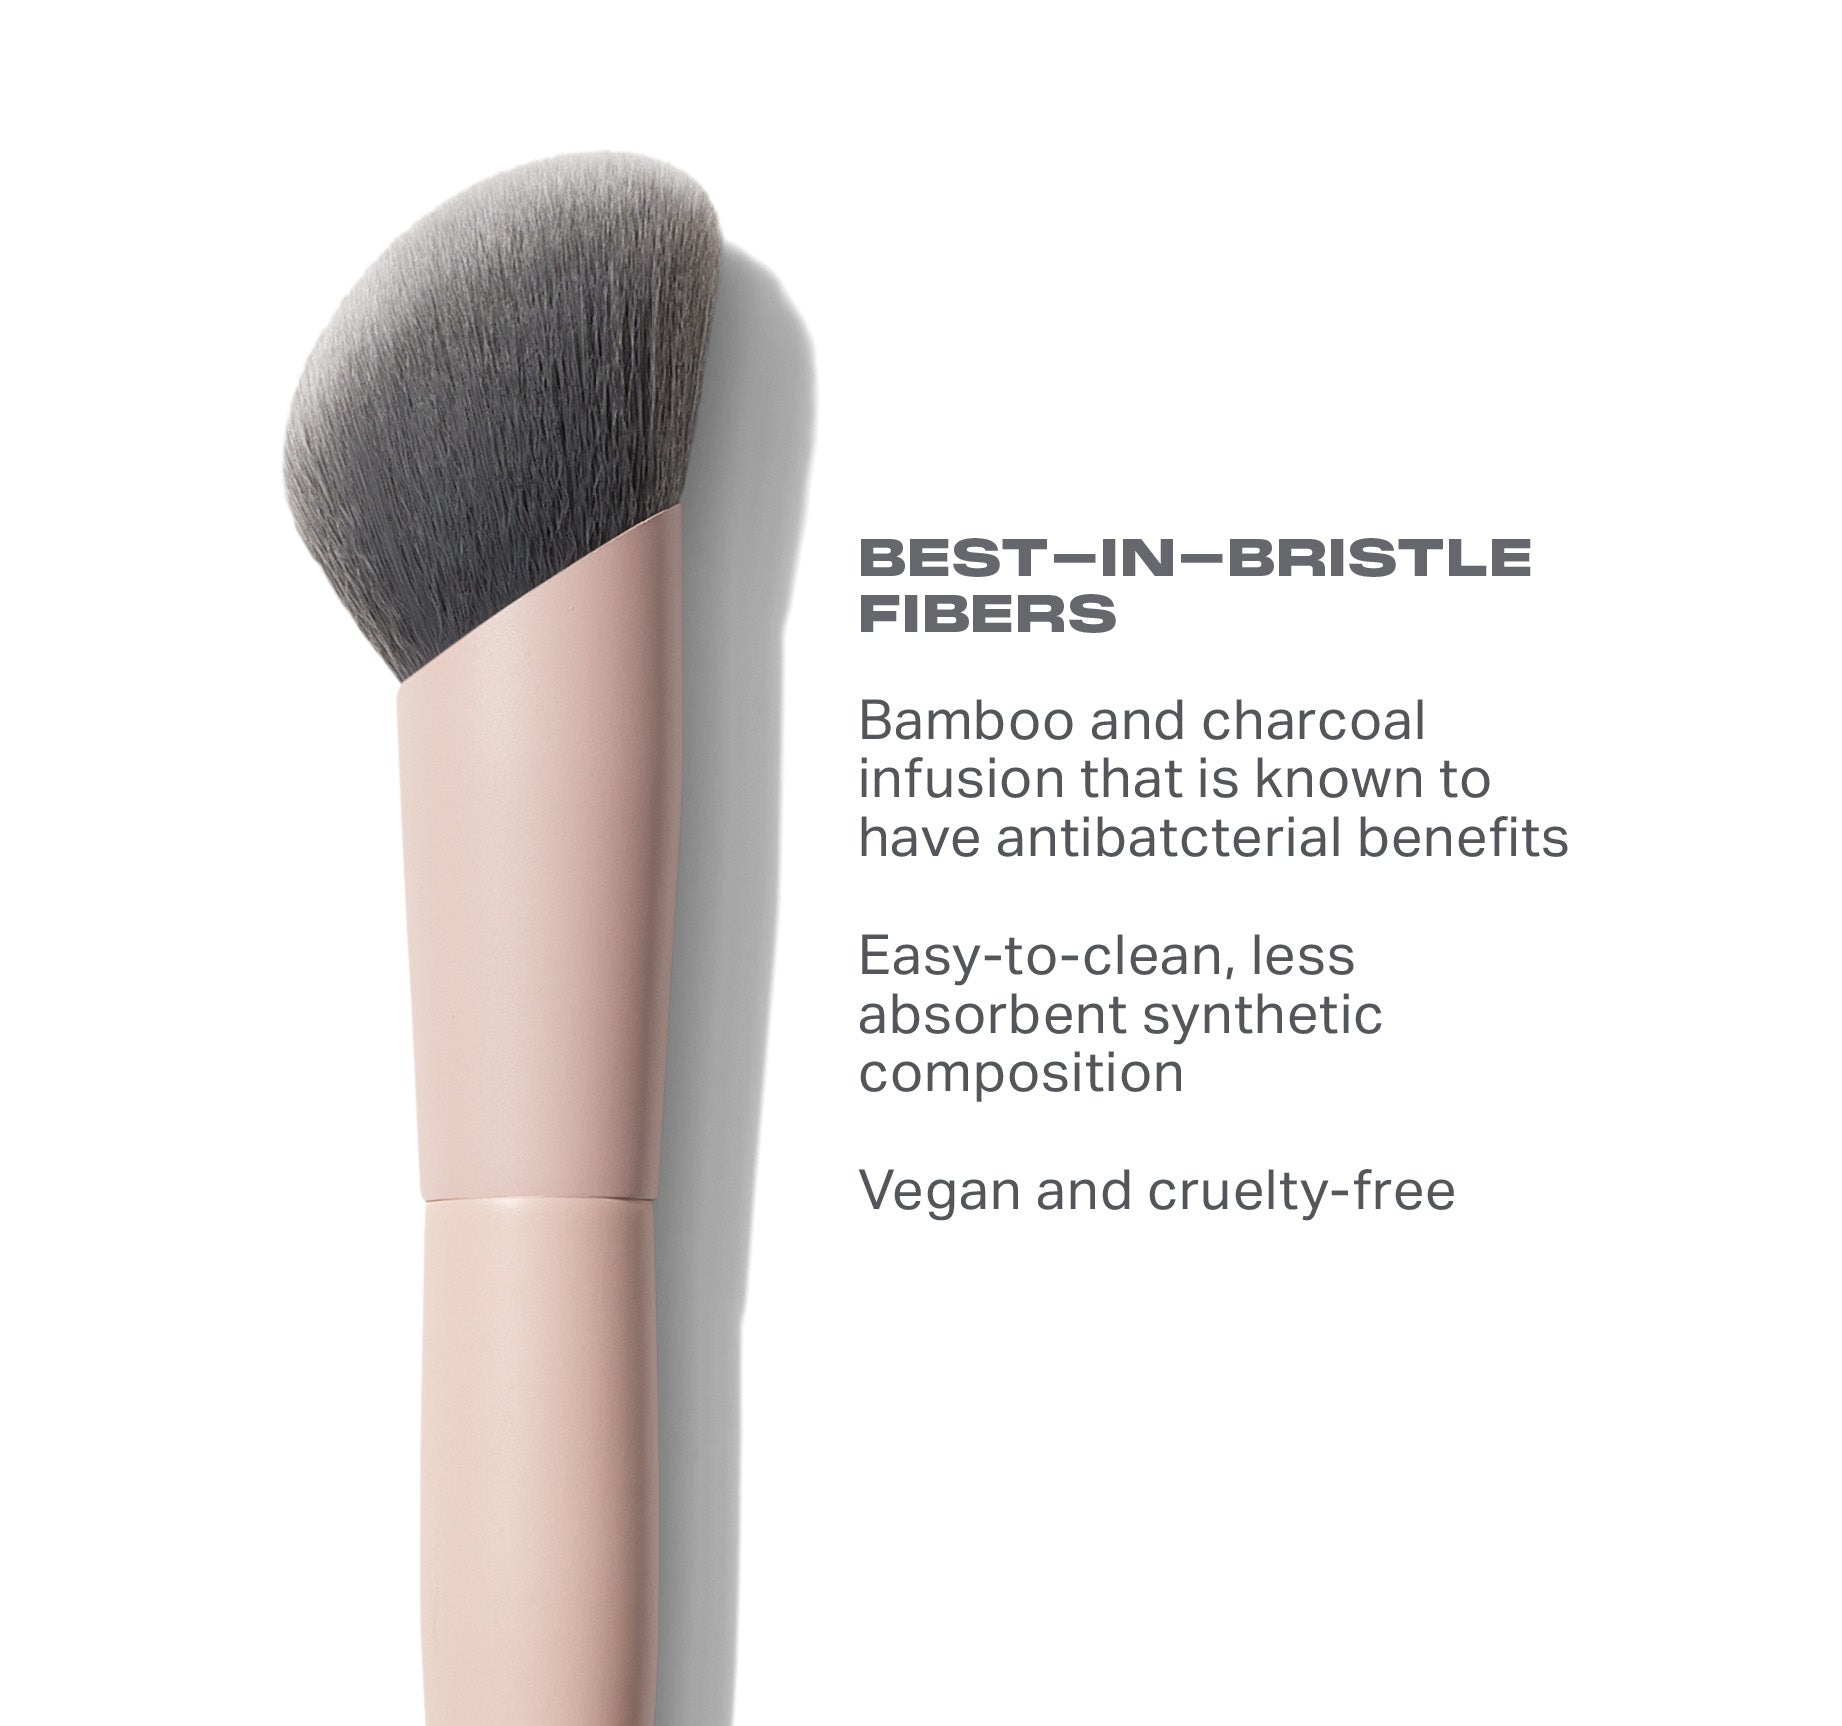 Face Shaping Essentials Bamboo & Charcoal Infused Face Brush Set - Image 4